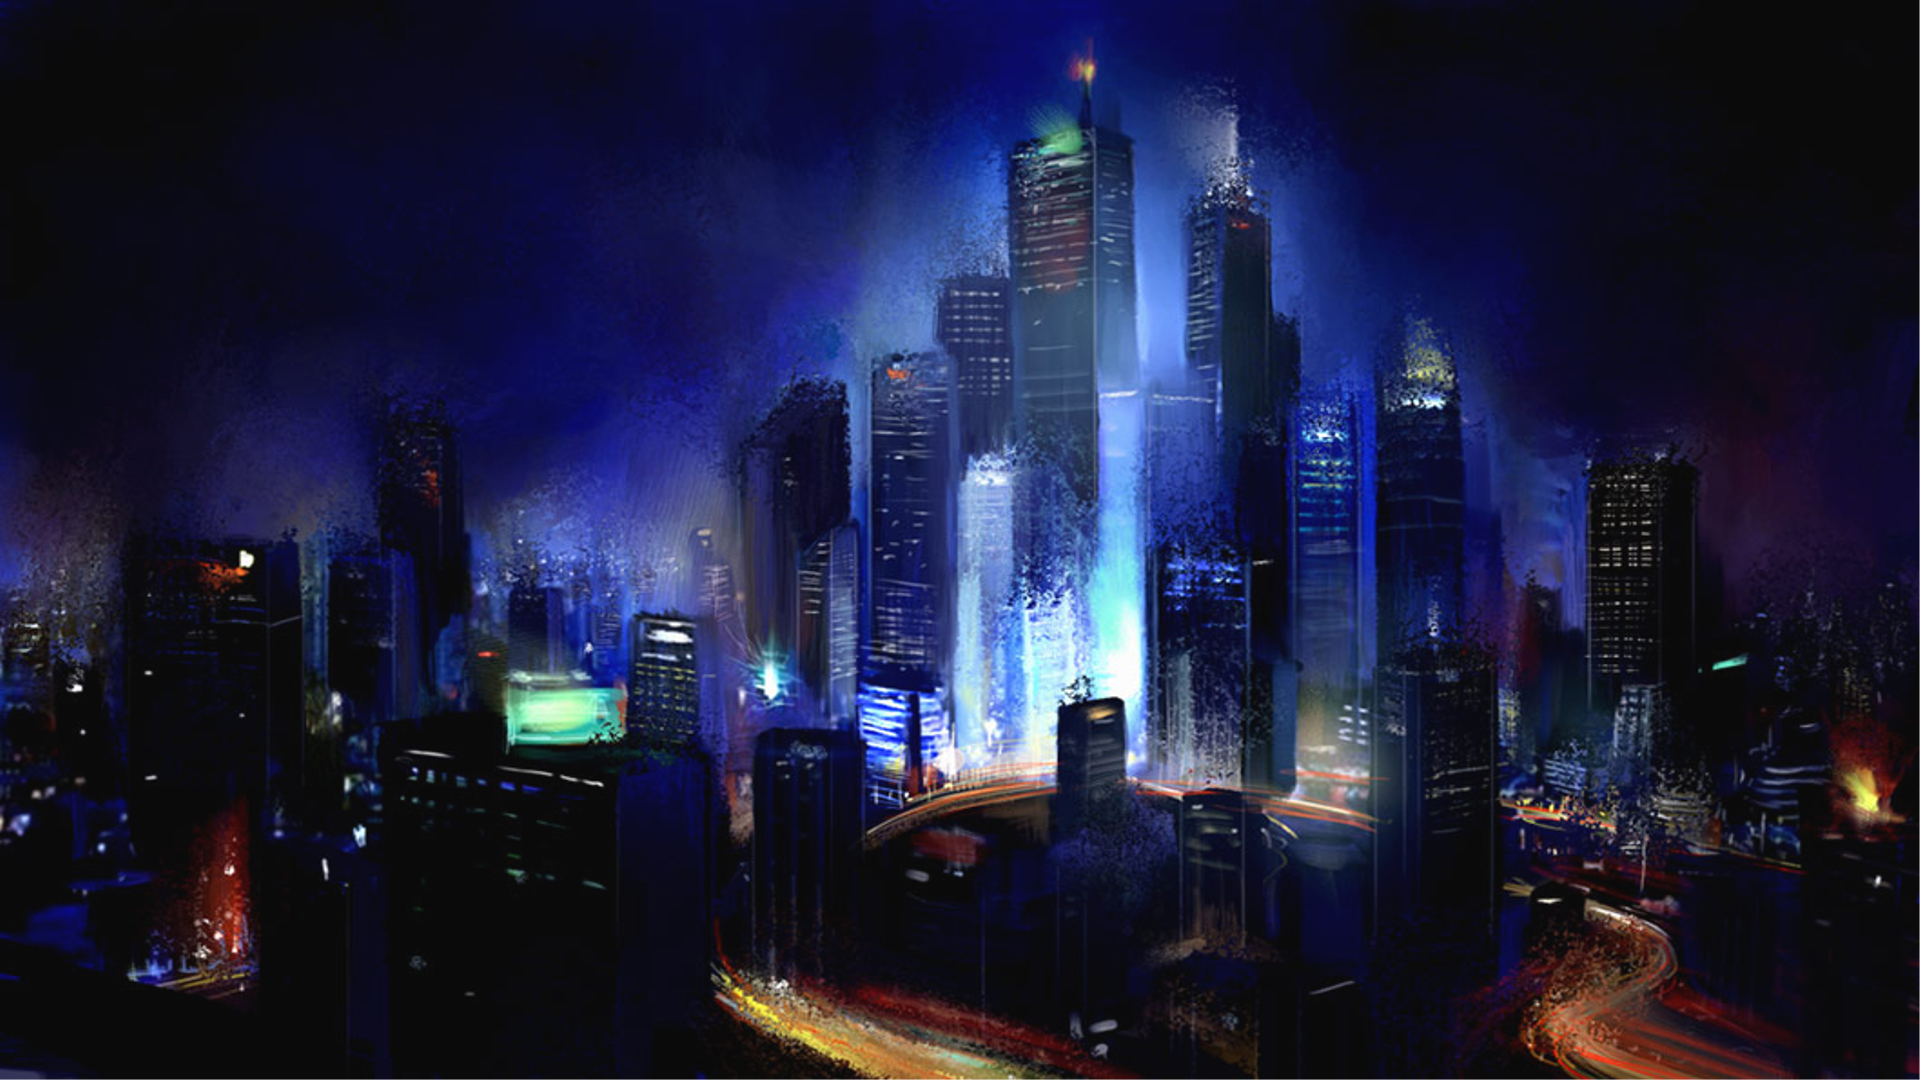 Cityscape HD Wallpaper Find An Image You